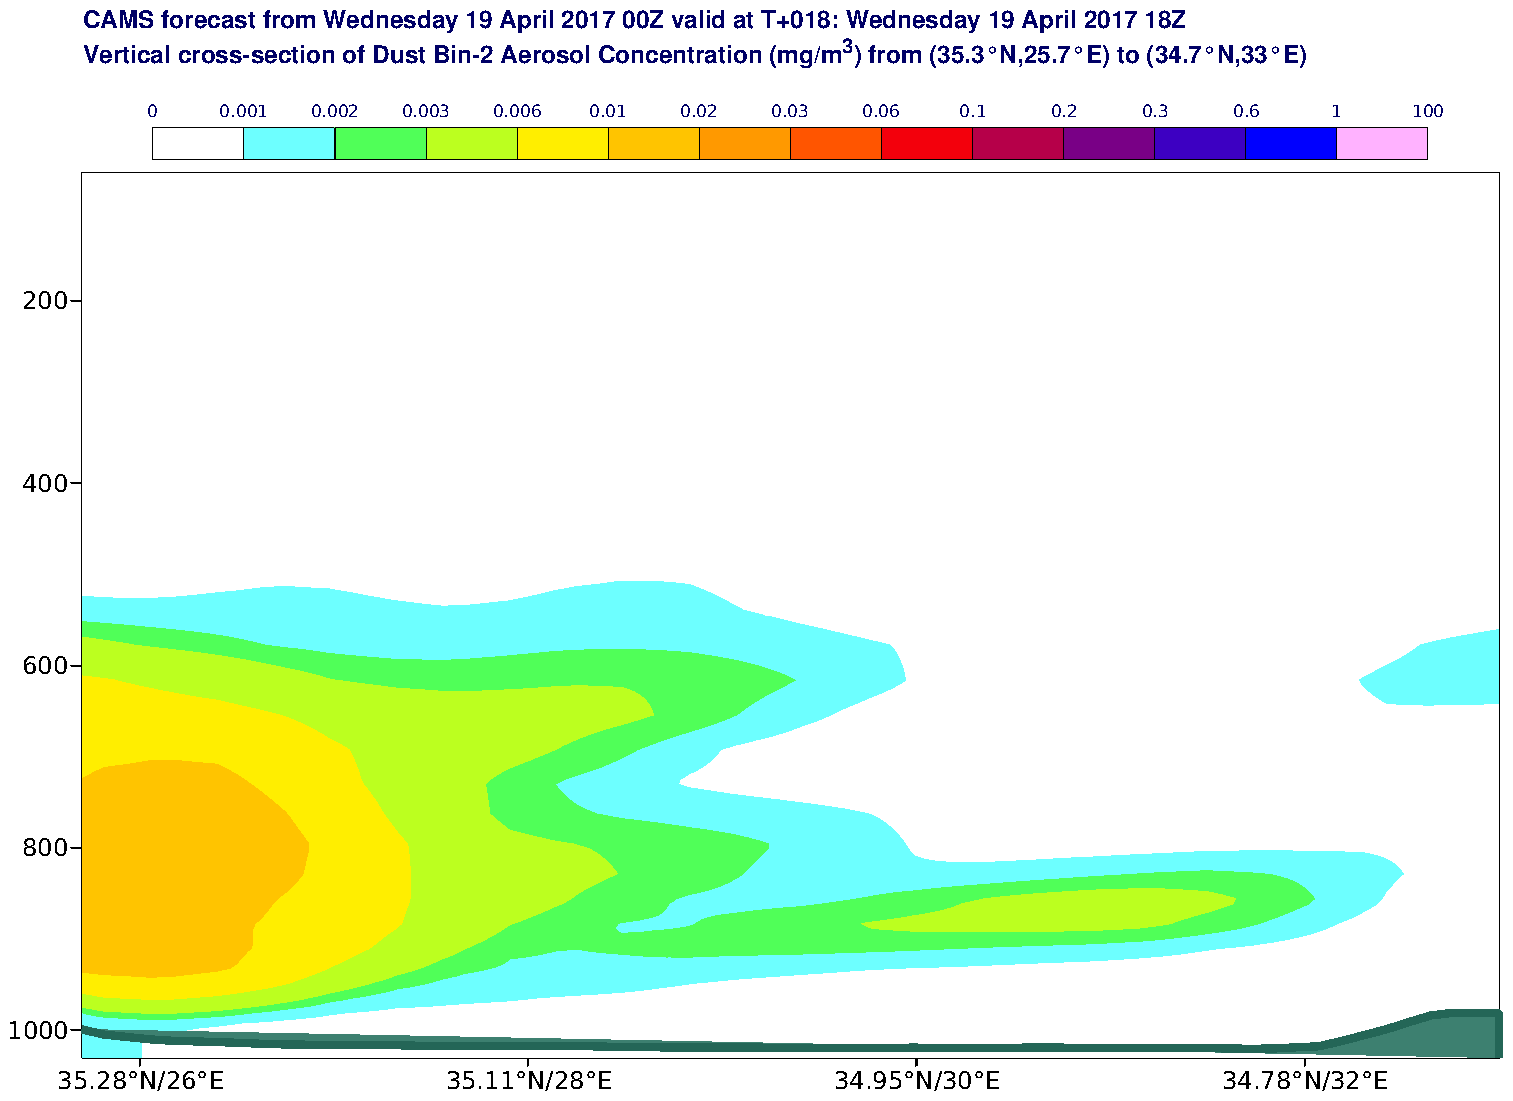 Vertical cross-section of Dust Bin-2 Aerosol Concentration (mg/m3) valid at T18 - 2017-04-19 18:00